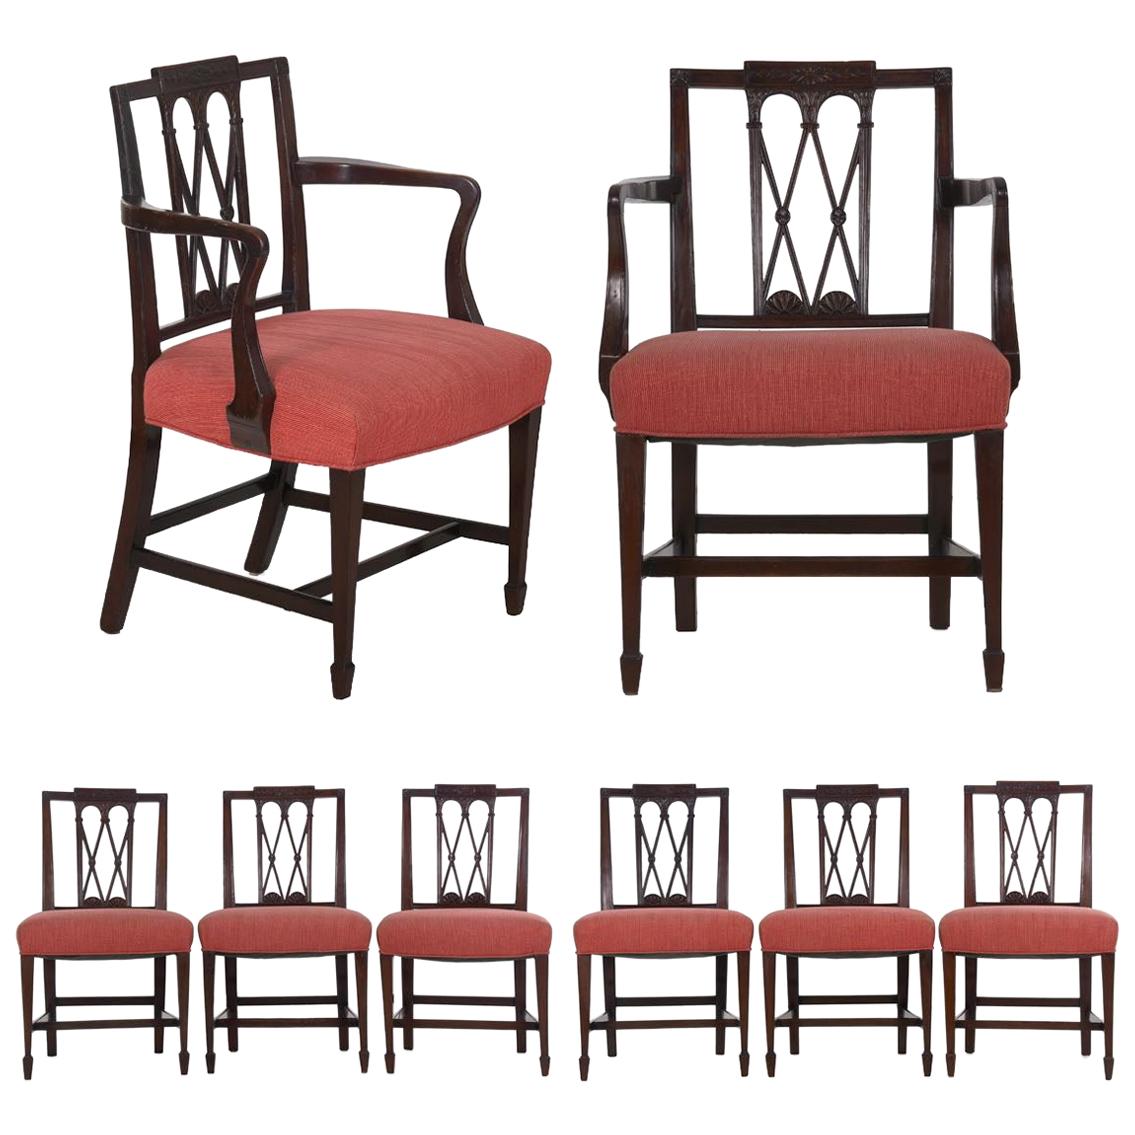 19th Century English Regency Antique Carved Mahogany Dining Chairs, Set of 8